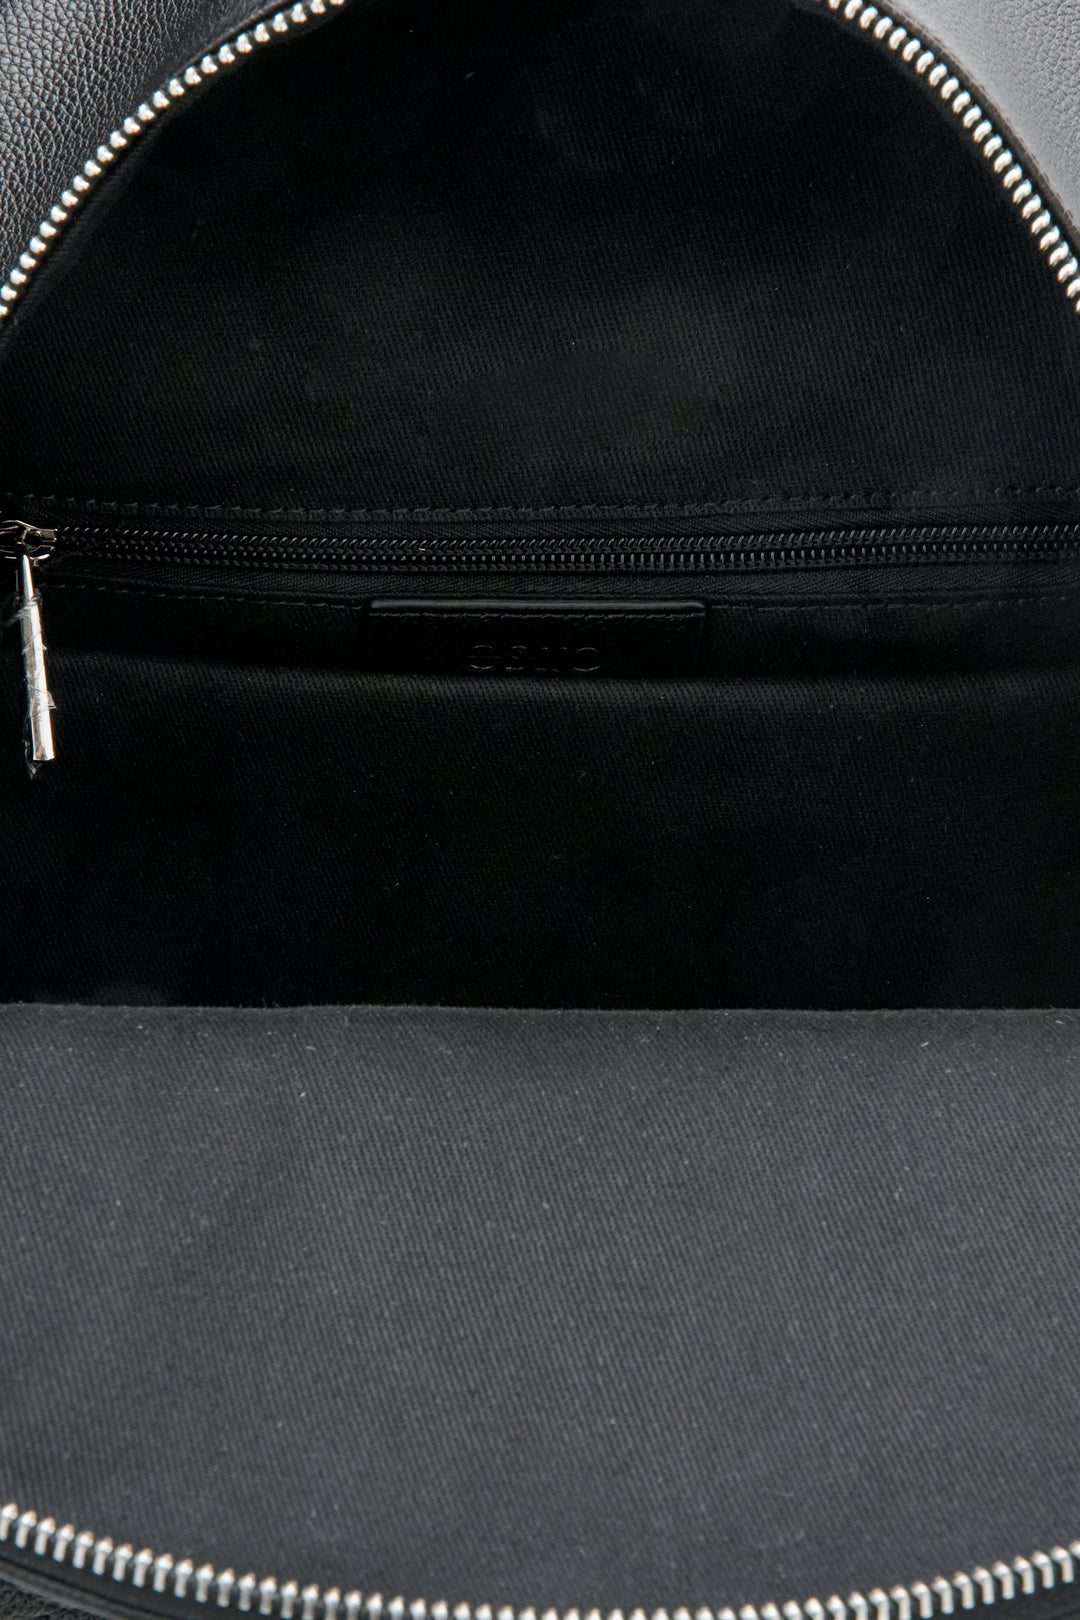 Black leather women's backpack by Estro - presentation of one of the pockets.